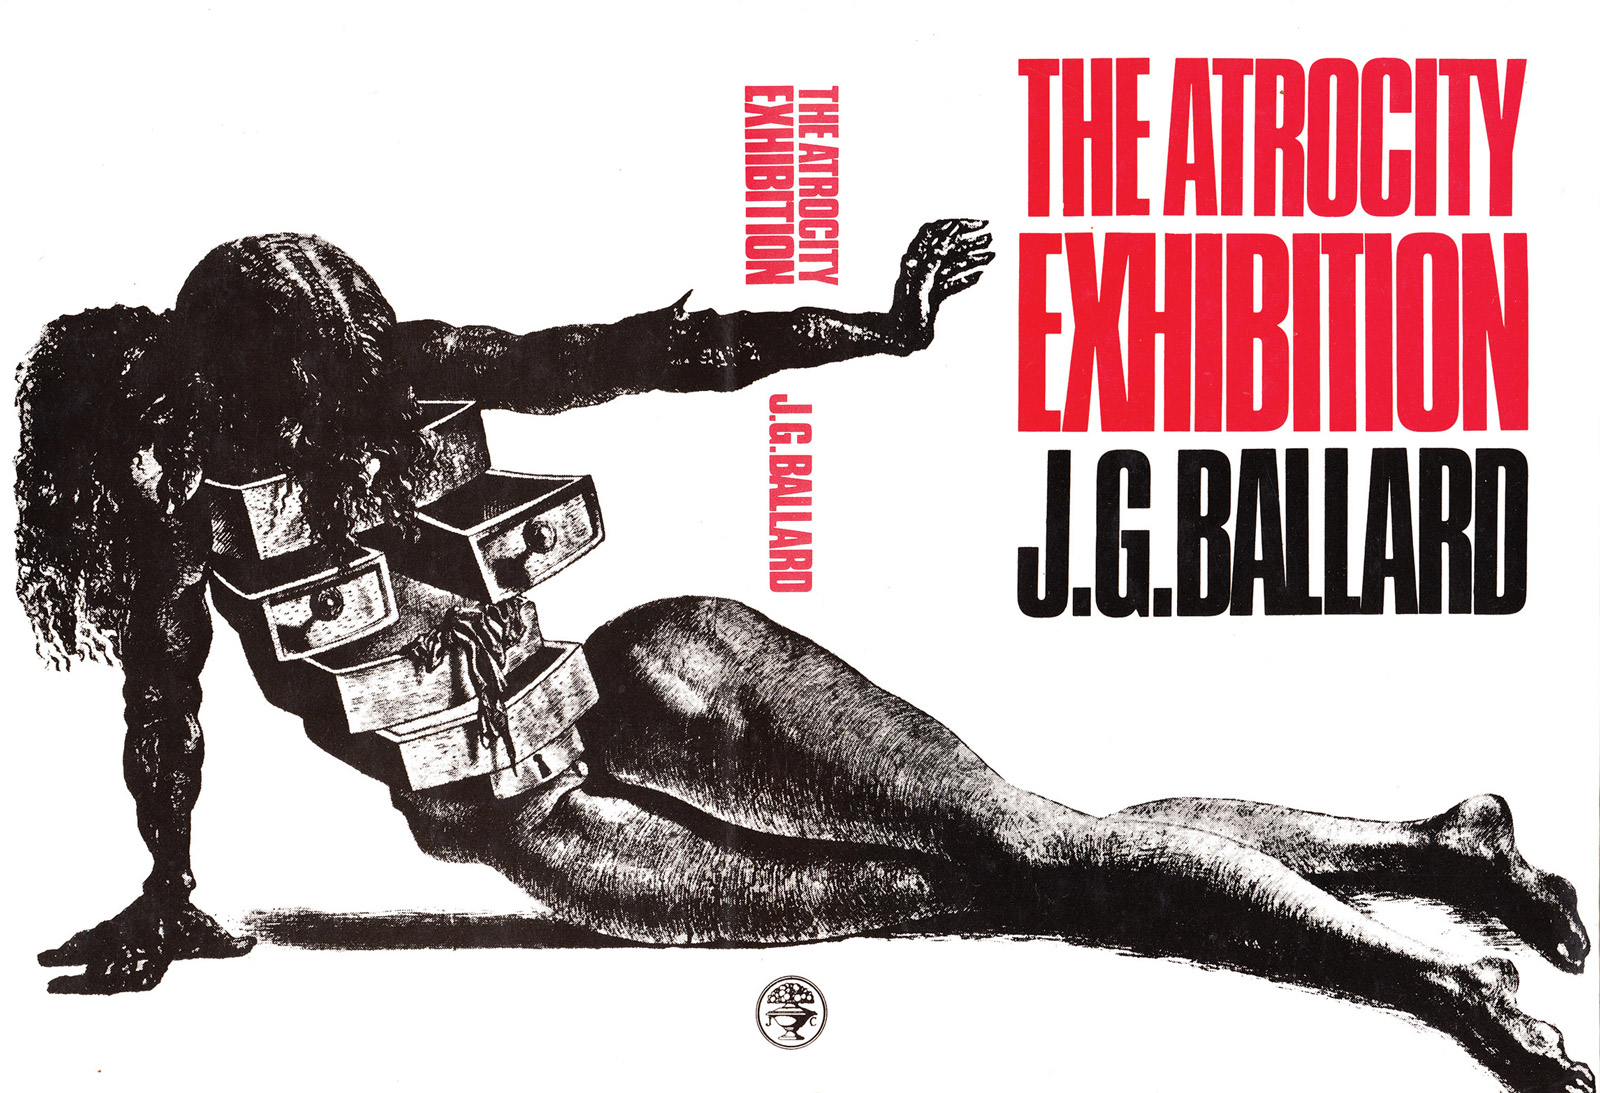 The first edition UK cover of J.G. Ballard’s nineteen seventy book “The Atrocity Exhibition,” depicting a human body with a torso made of drawers.